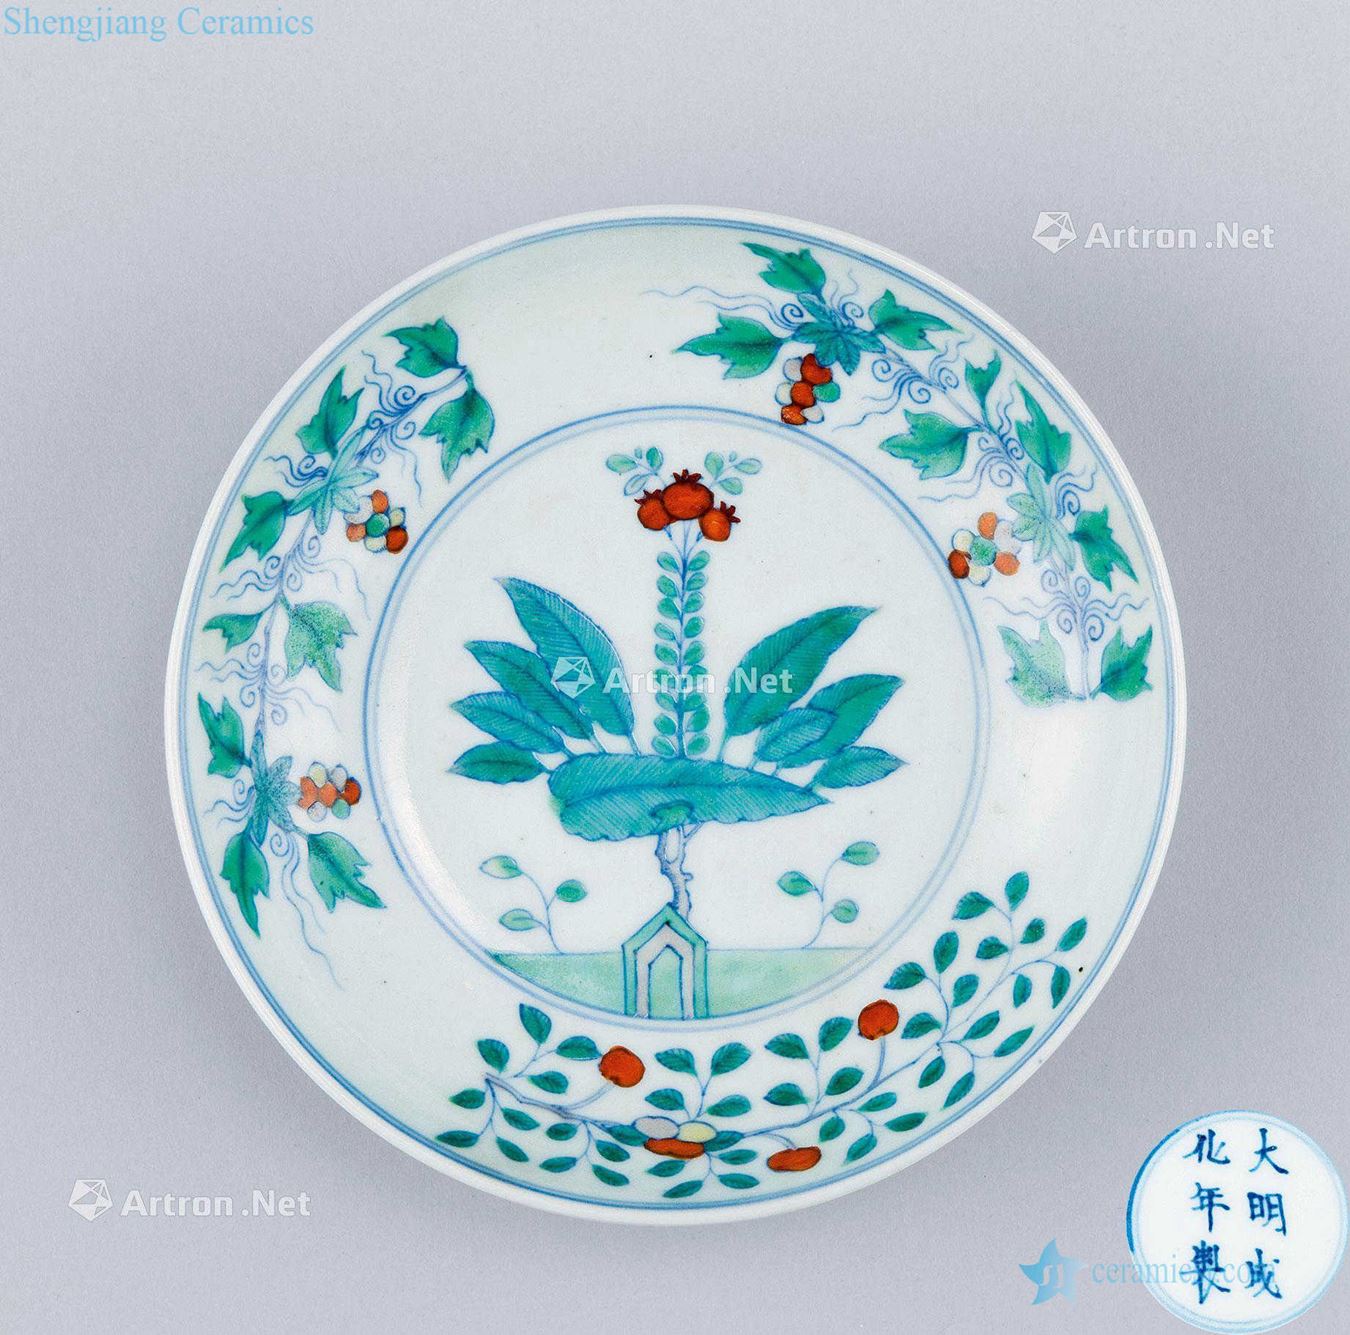 In the qing dynasty (1644-1911), bucket color flower fruit tray